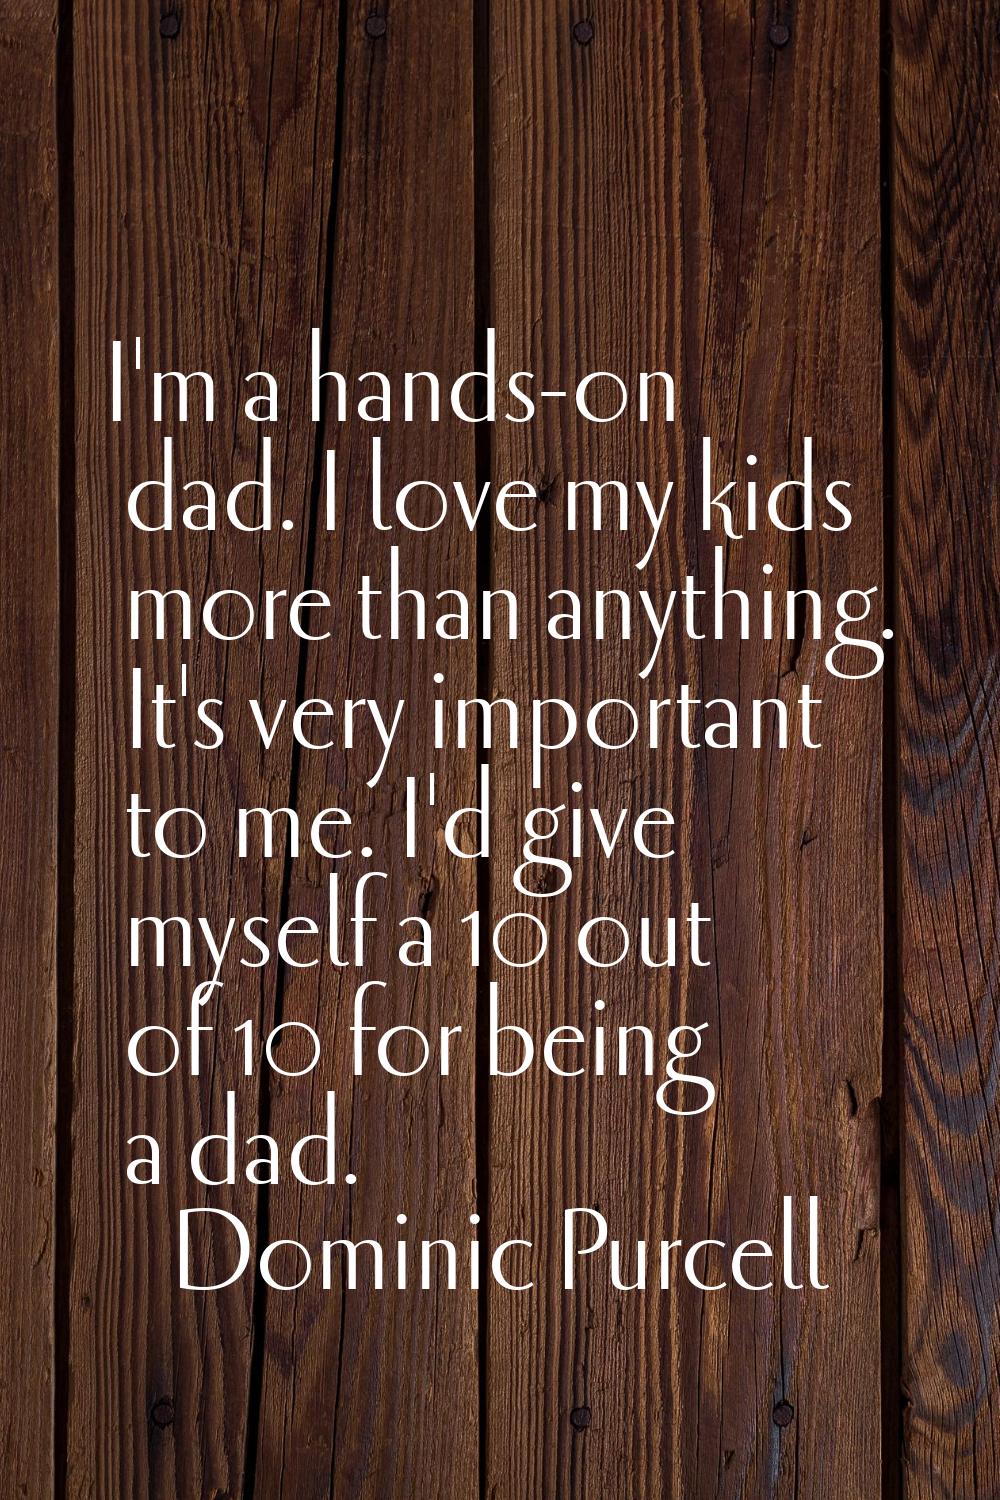 I'm a hands-on dad. I love my kids more than anything. It's very important to me. I'd give myself a